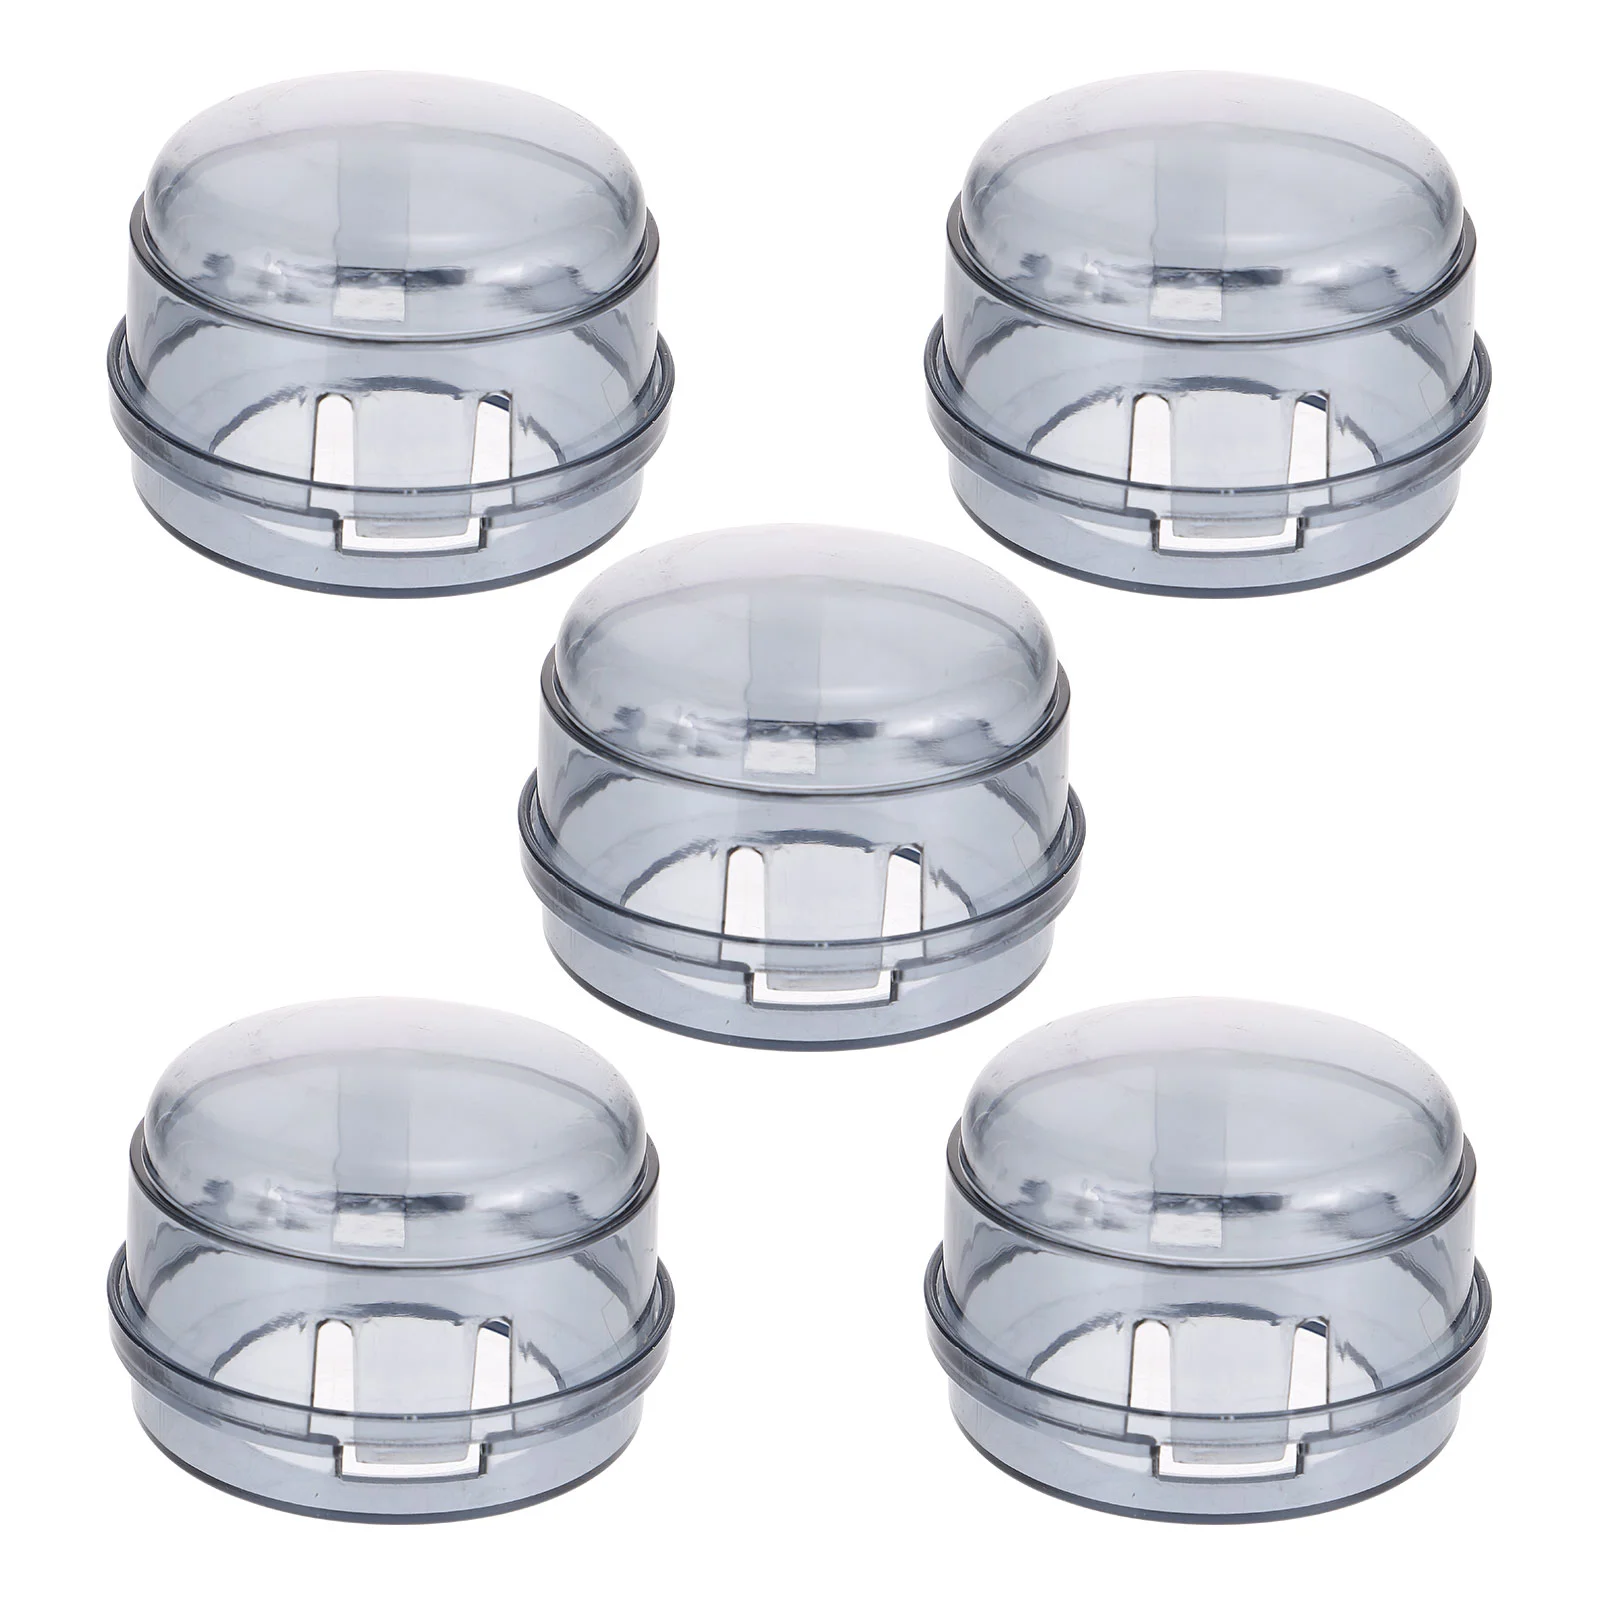 

5 Pcs Switch Cover Gas Stove Knob Covers Door Locks Child Safety Guard Plastic Locks Oven Universal Cooker Protector